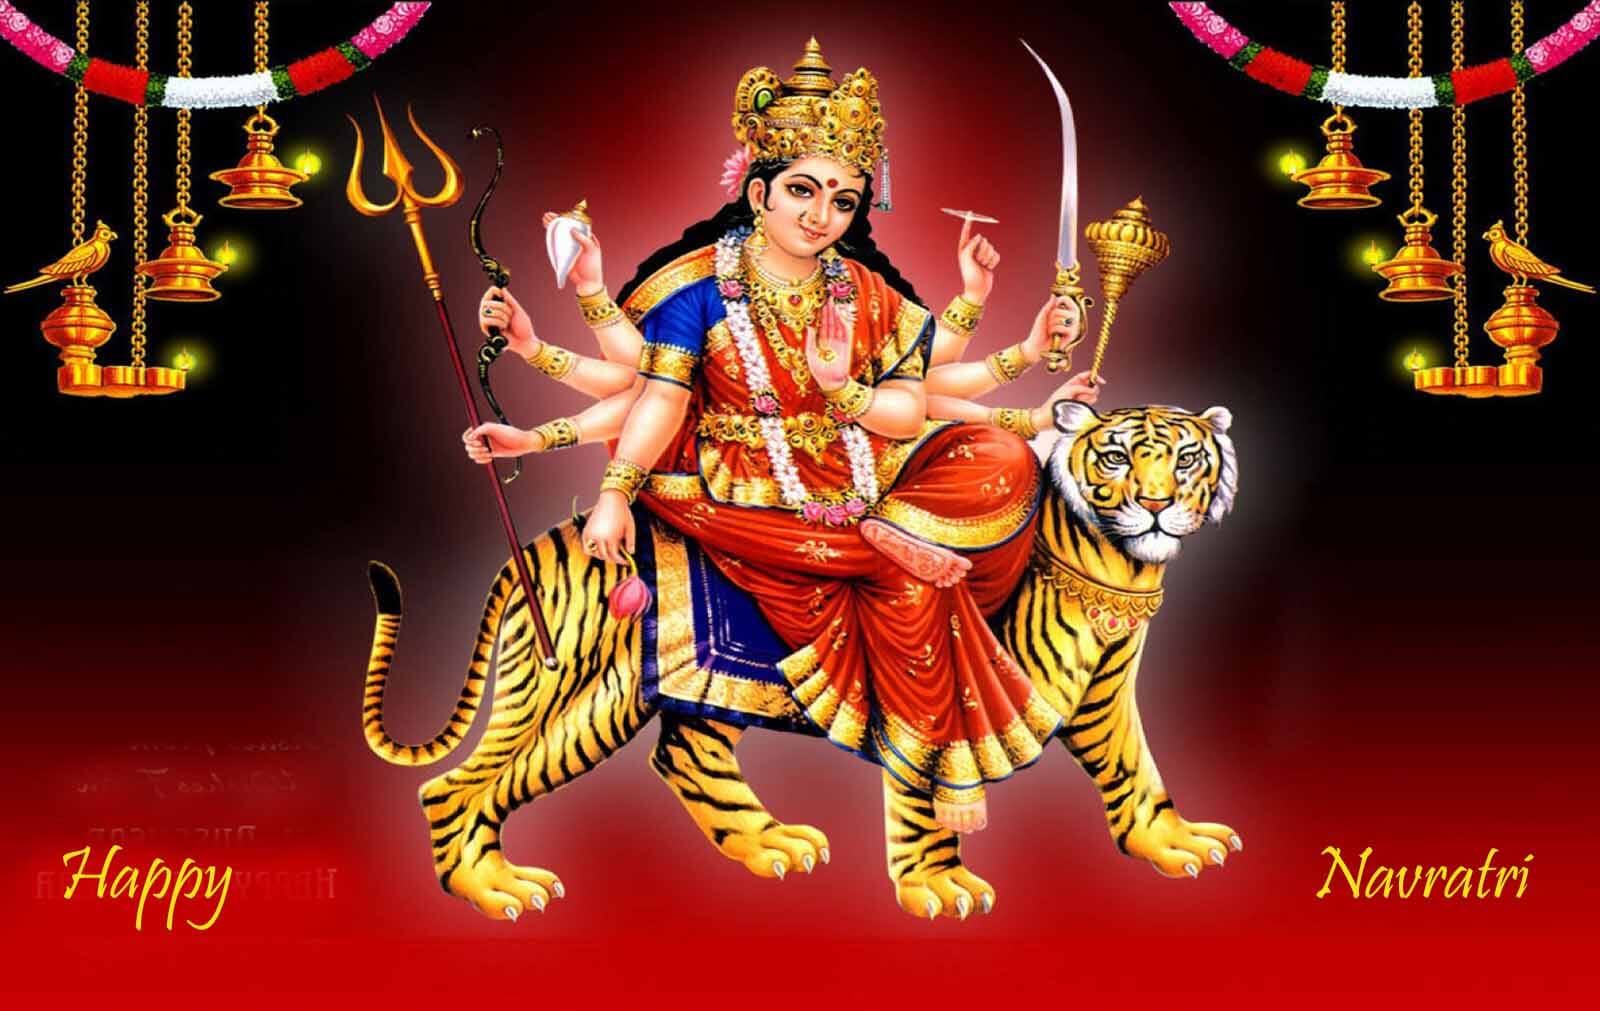 Happy Navratri Images Hd Wallpapers Download - Happy Navratri Image 2019 , HD Wallpaper & Backgrounds